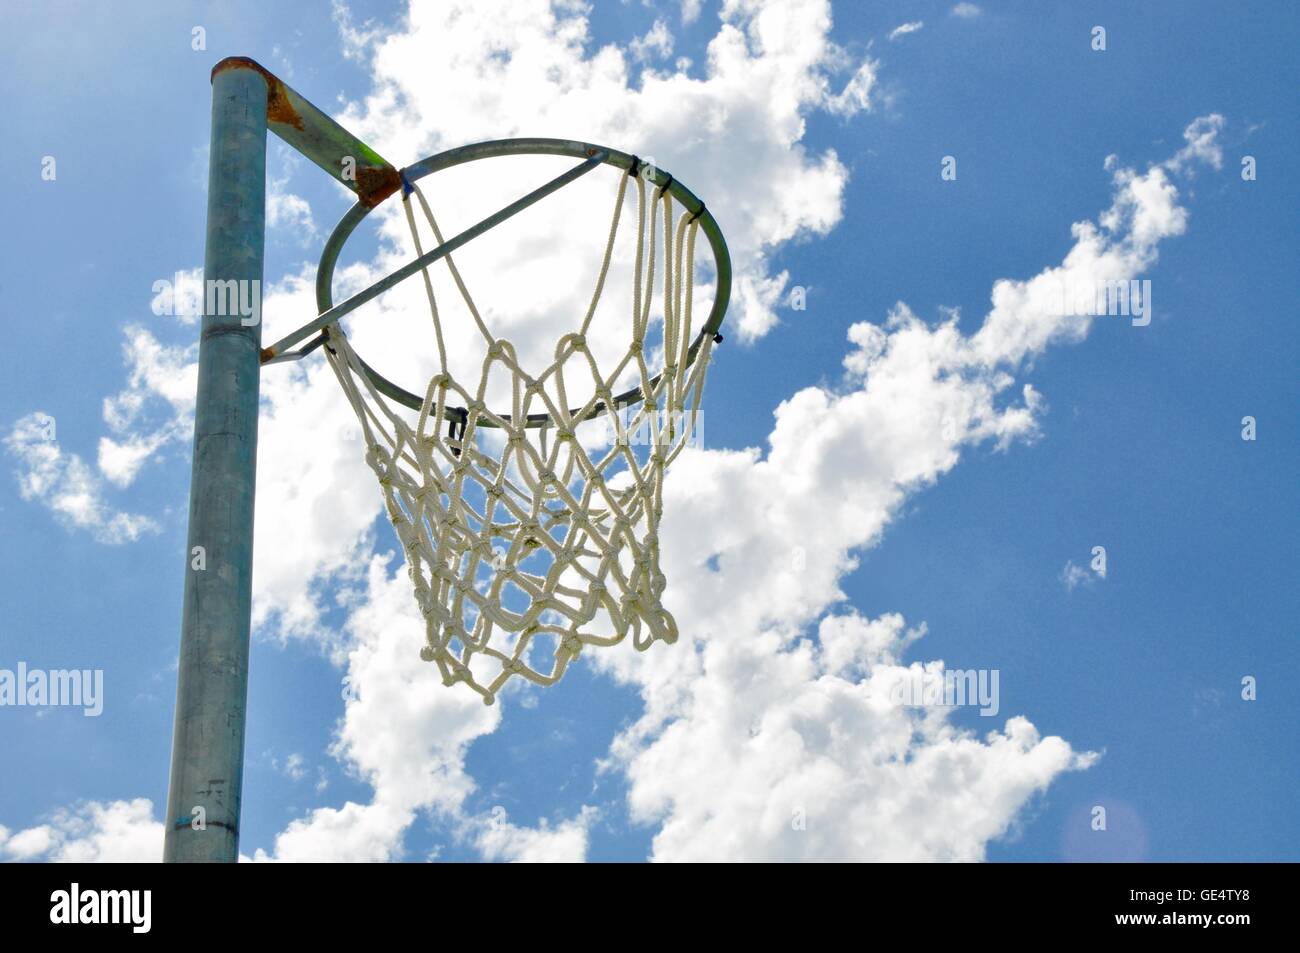 Abstract perspective of a netball rim with net against a blue sky and cloud background. Stock Photo